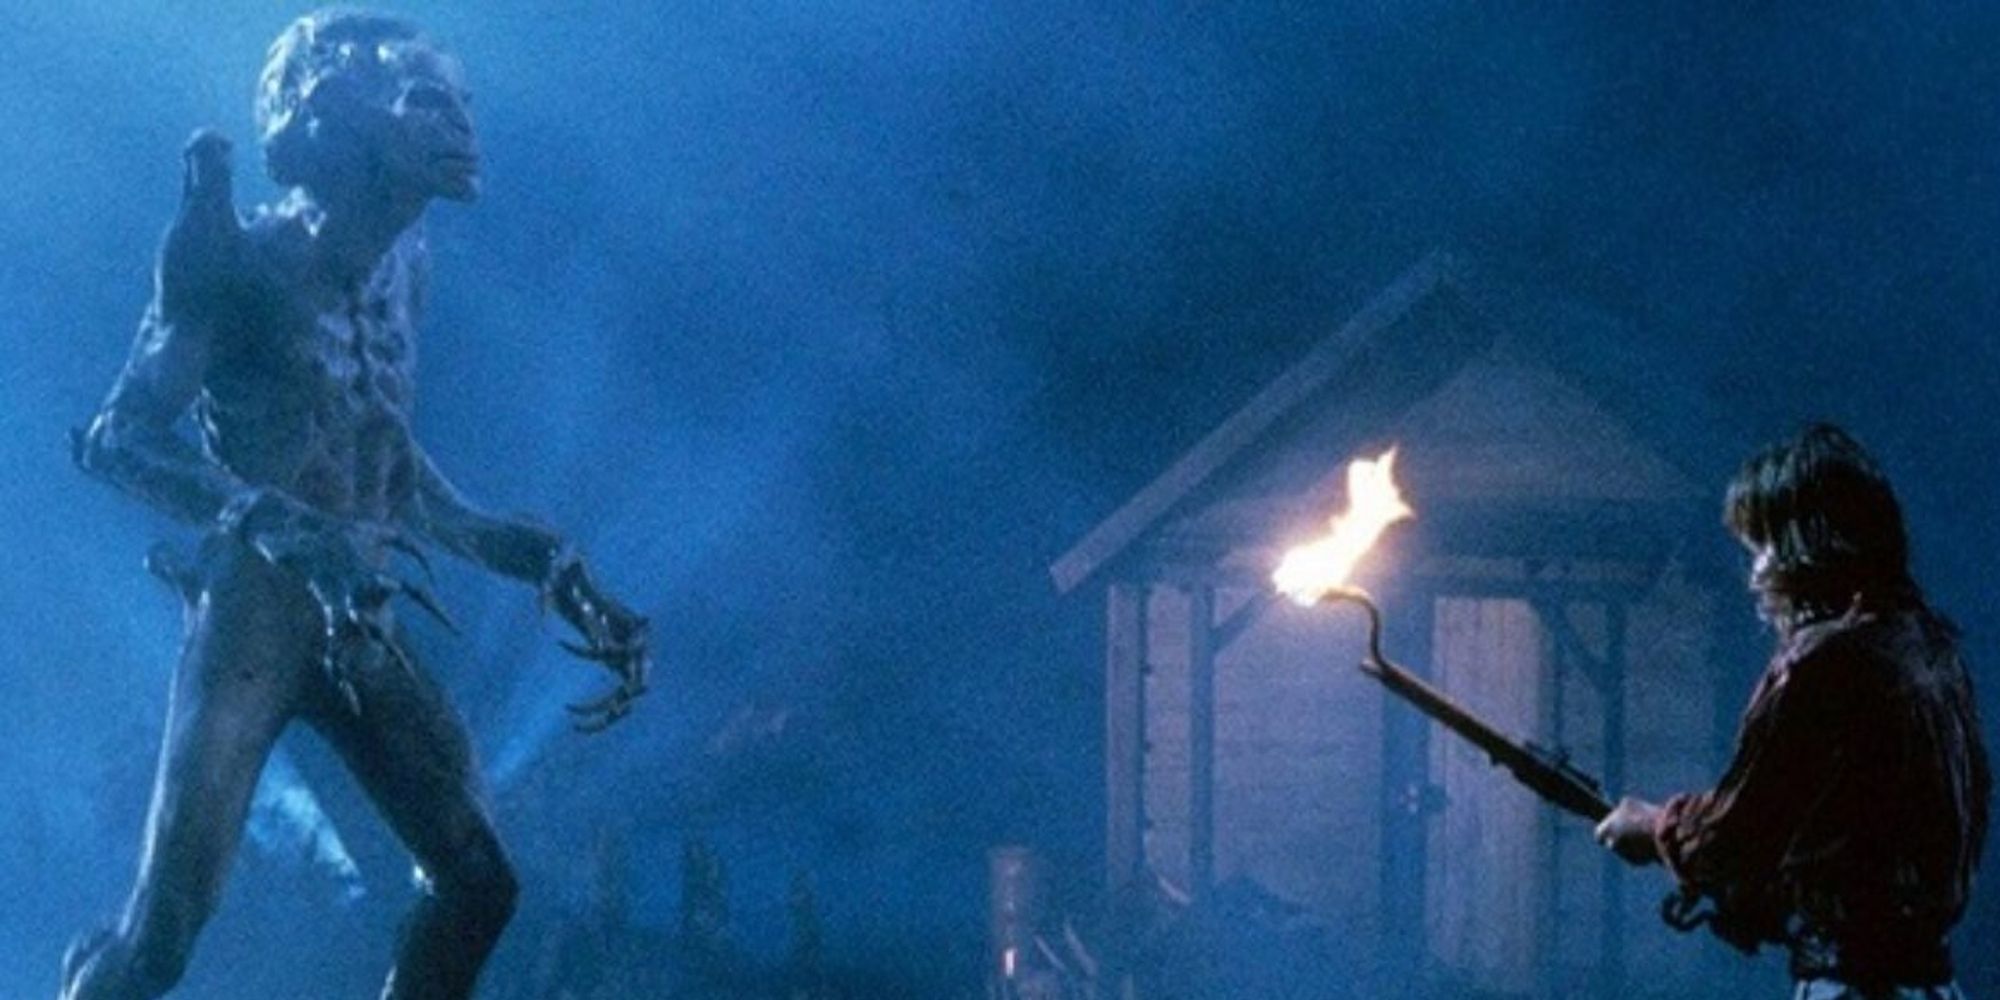 Tracey faces down the monster in Pumpkinhead (1988)